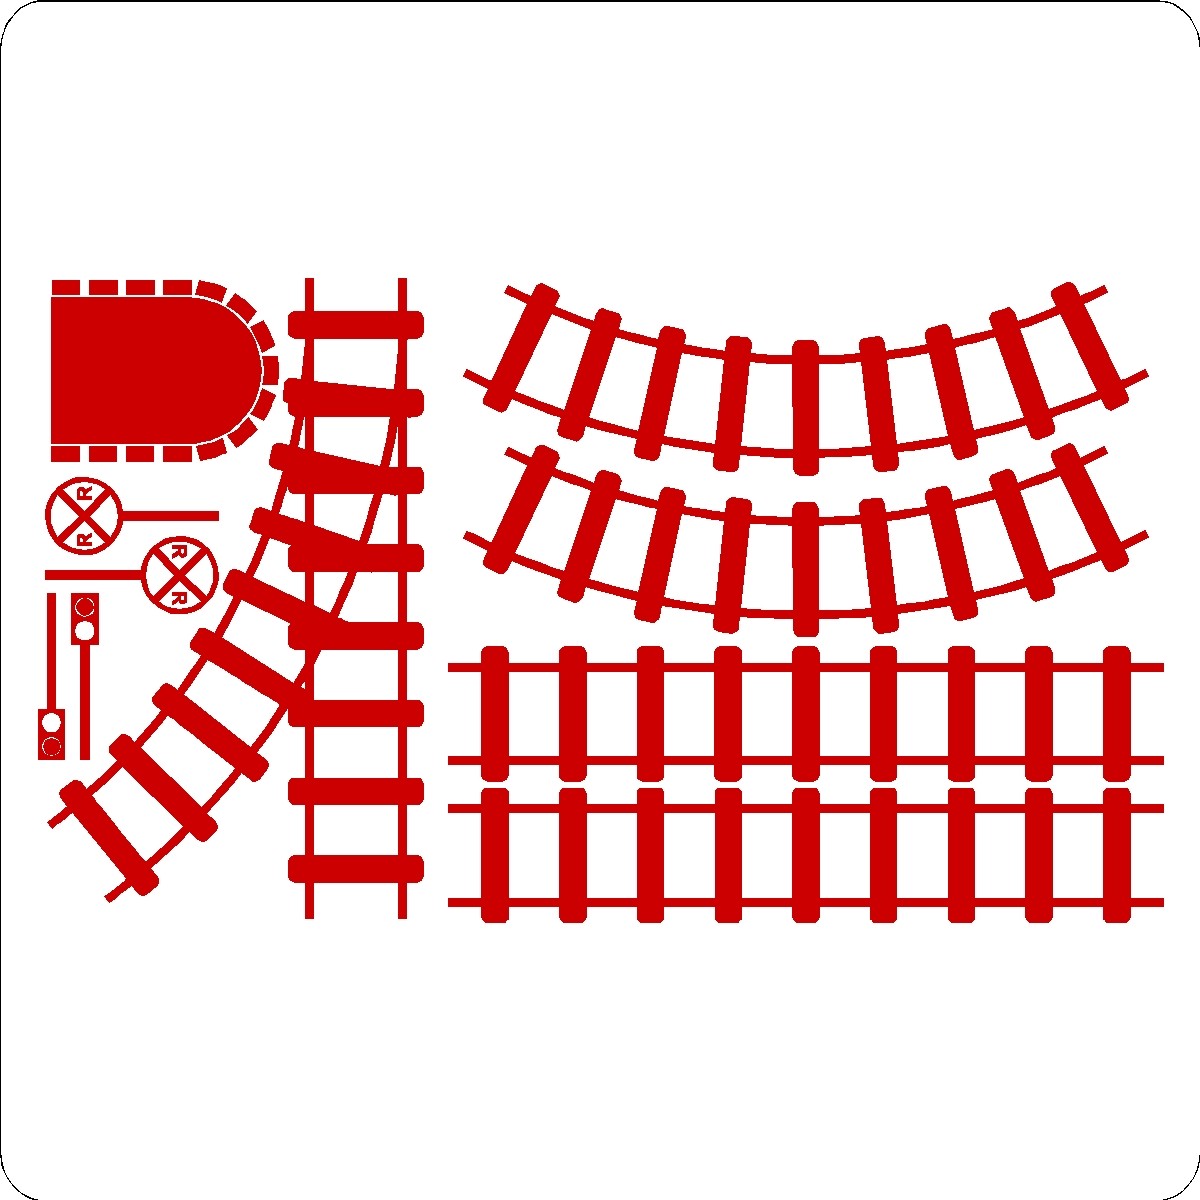 Curved Train Track Clipart   Clipart Panda   Free Clipart Images